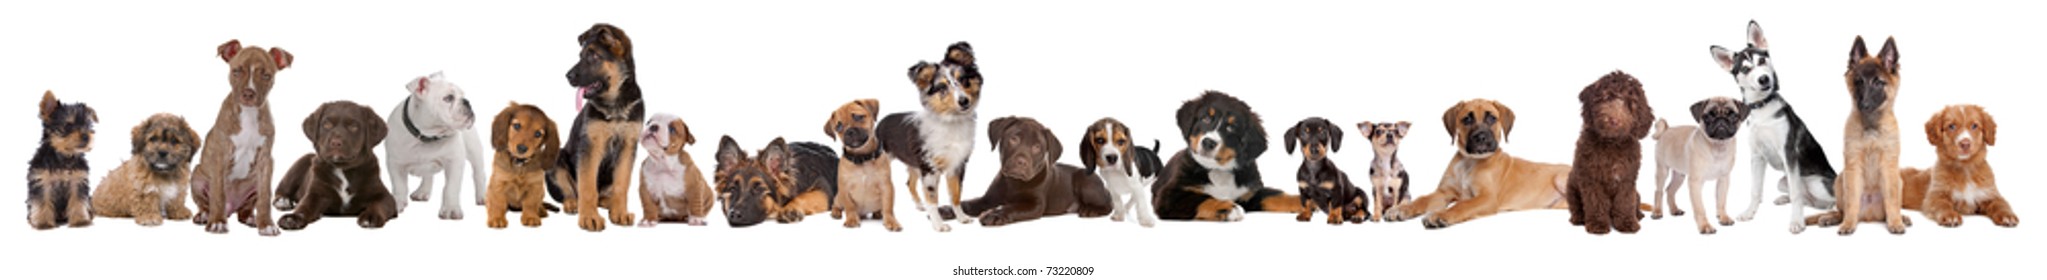 22 puppy dogs in a row in front of a white background